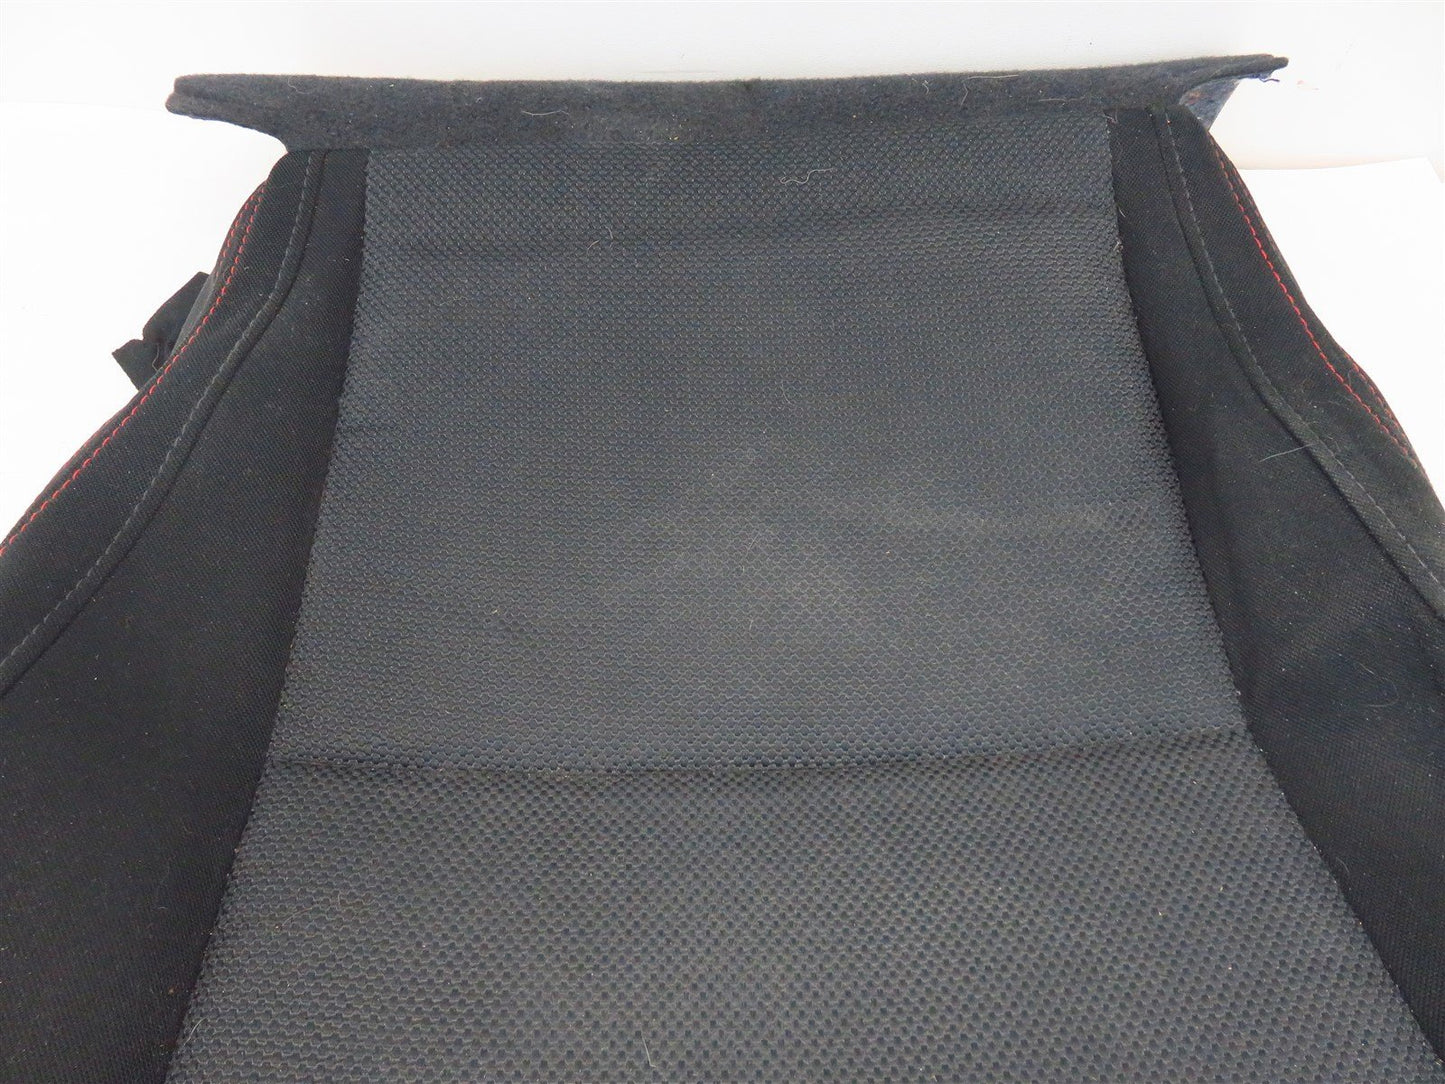 15-17 Subaru WRX Driver Front Seat Bottom Cover Skin Lower LH Left OEM 2015-2017